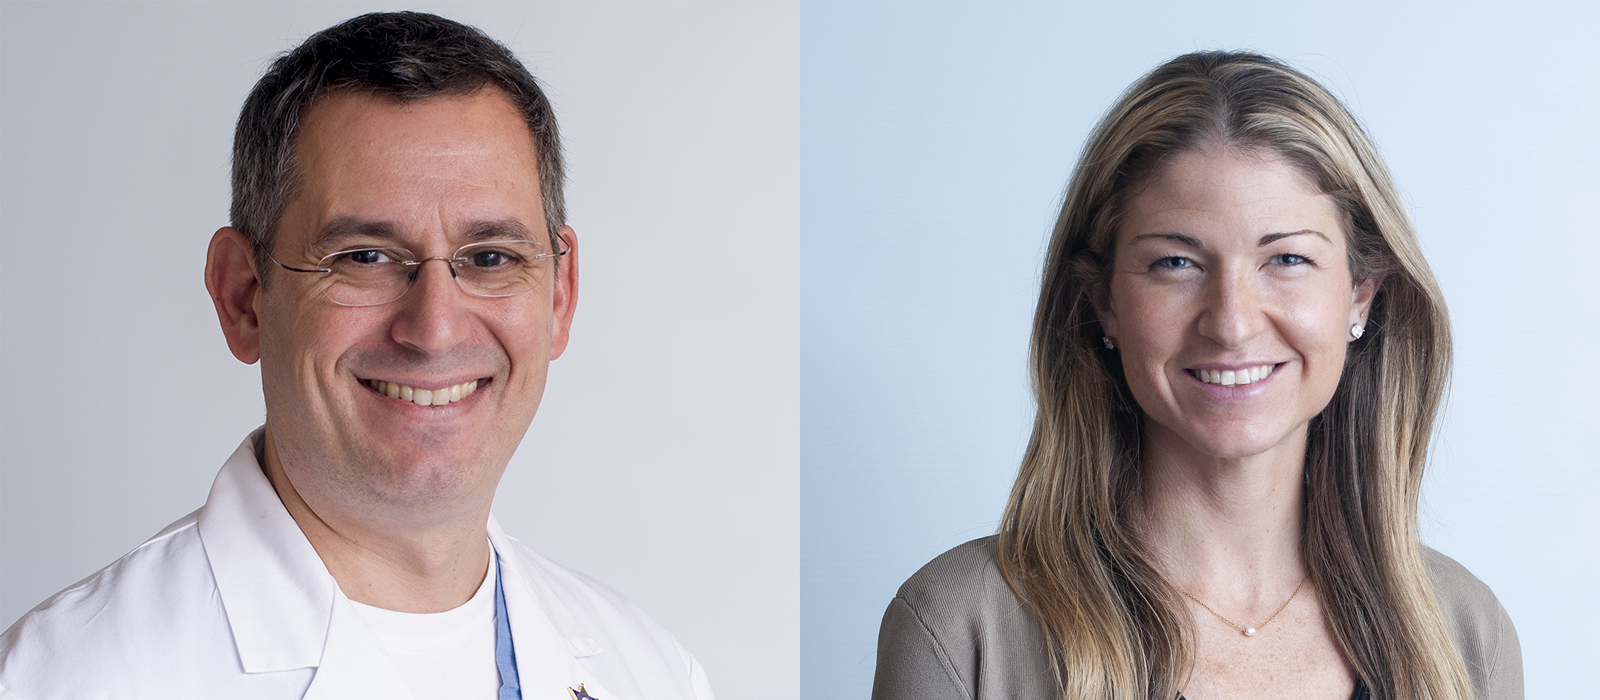 Peter T. Masiakos, MD, MS and Cornelia Griggs, MD